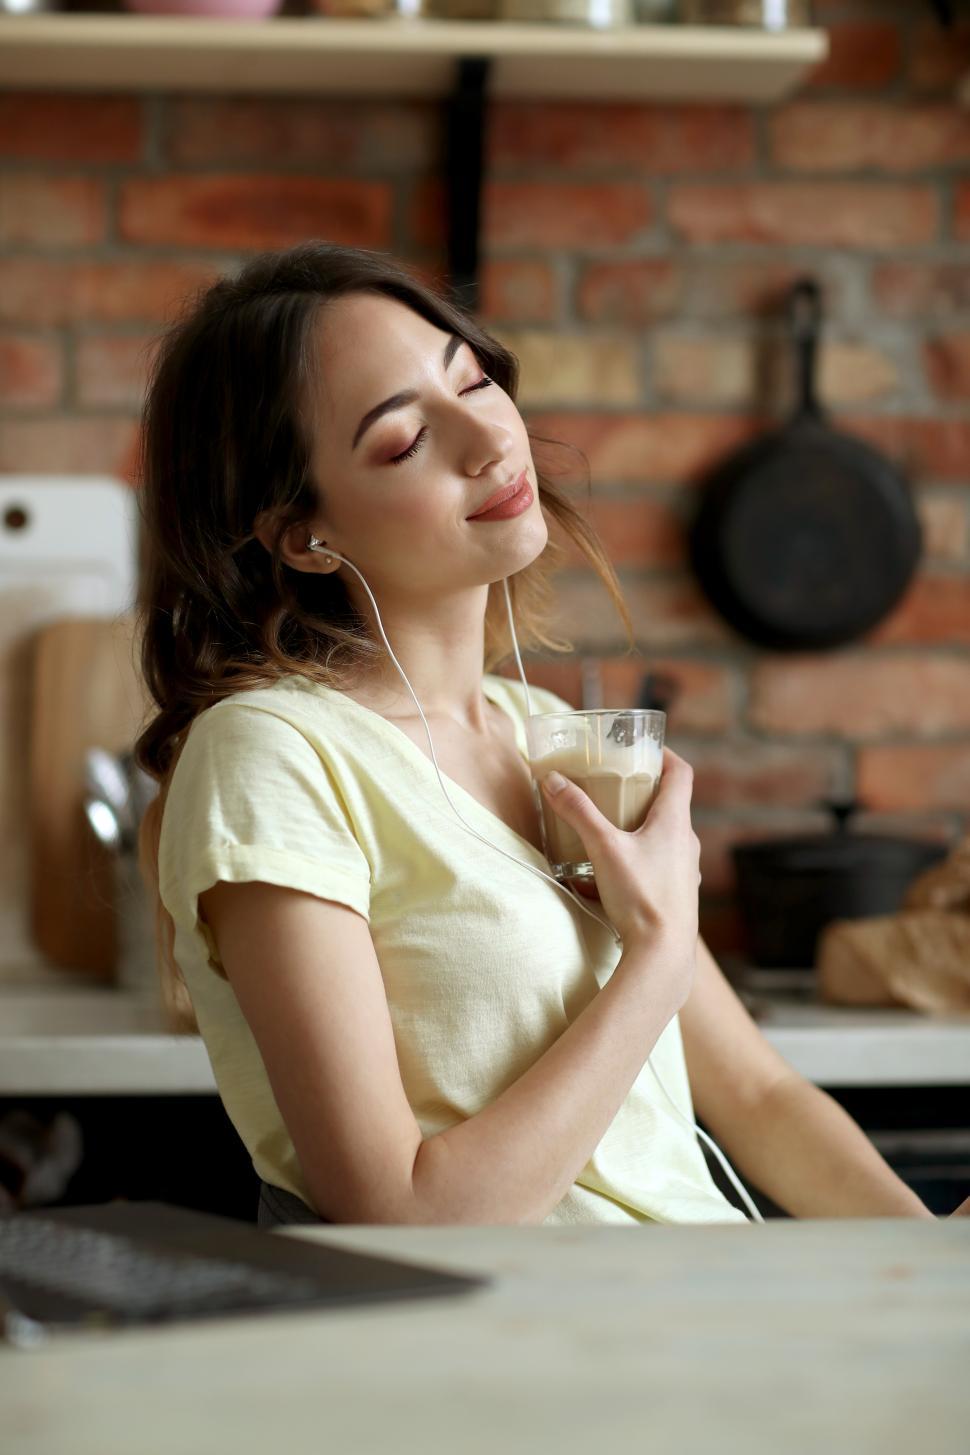 Free Image of Woman listening to music in kitchen 